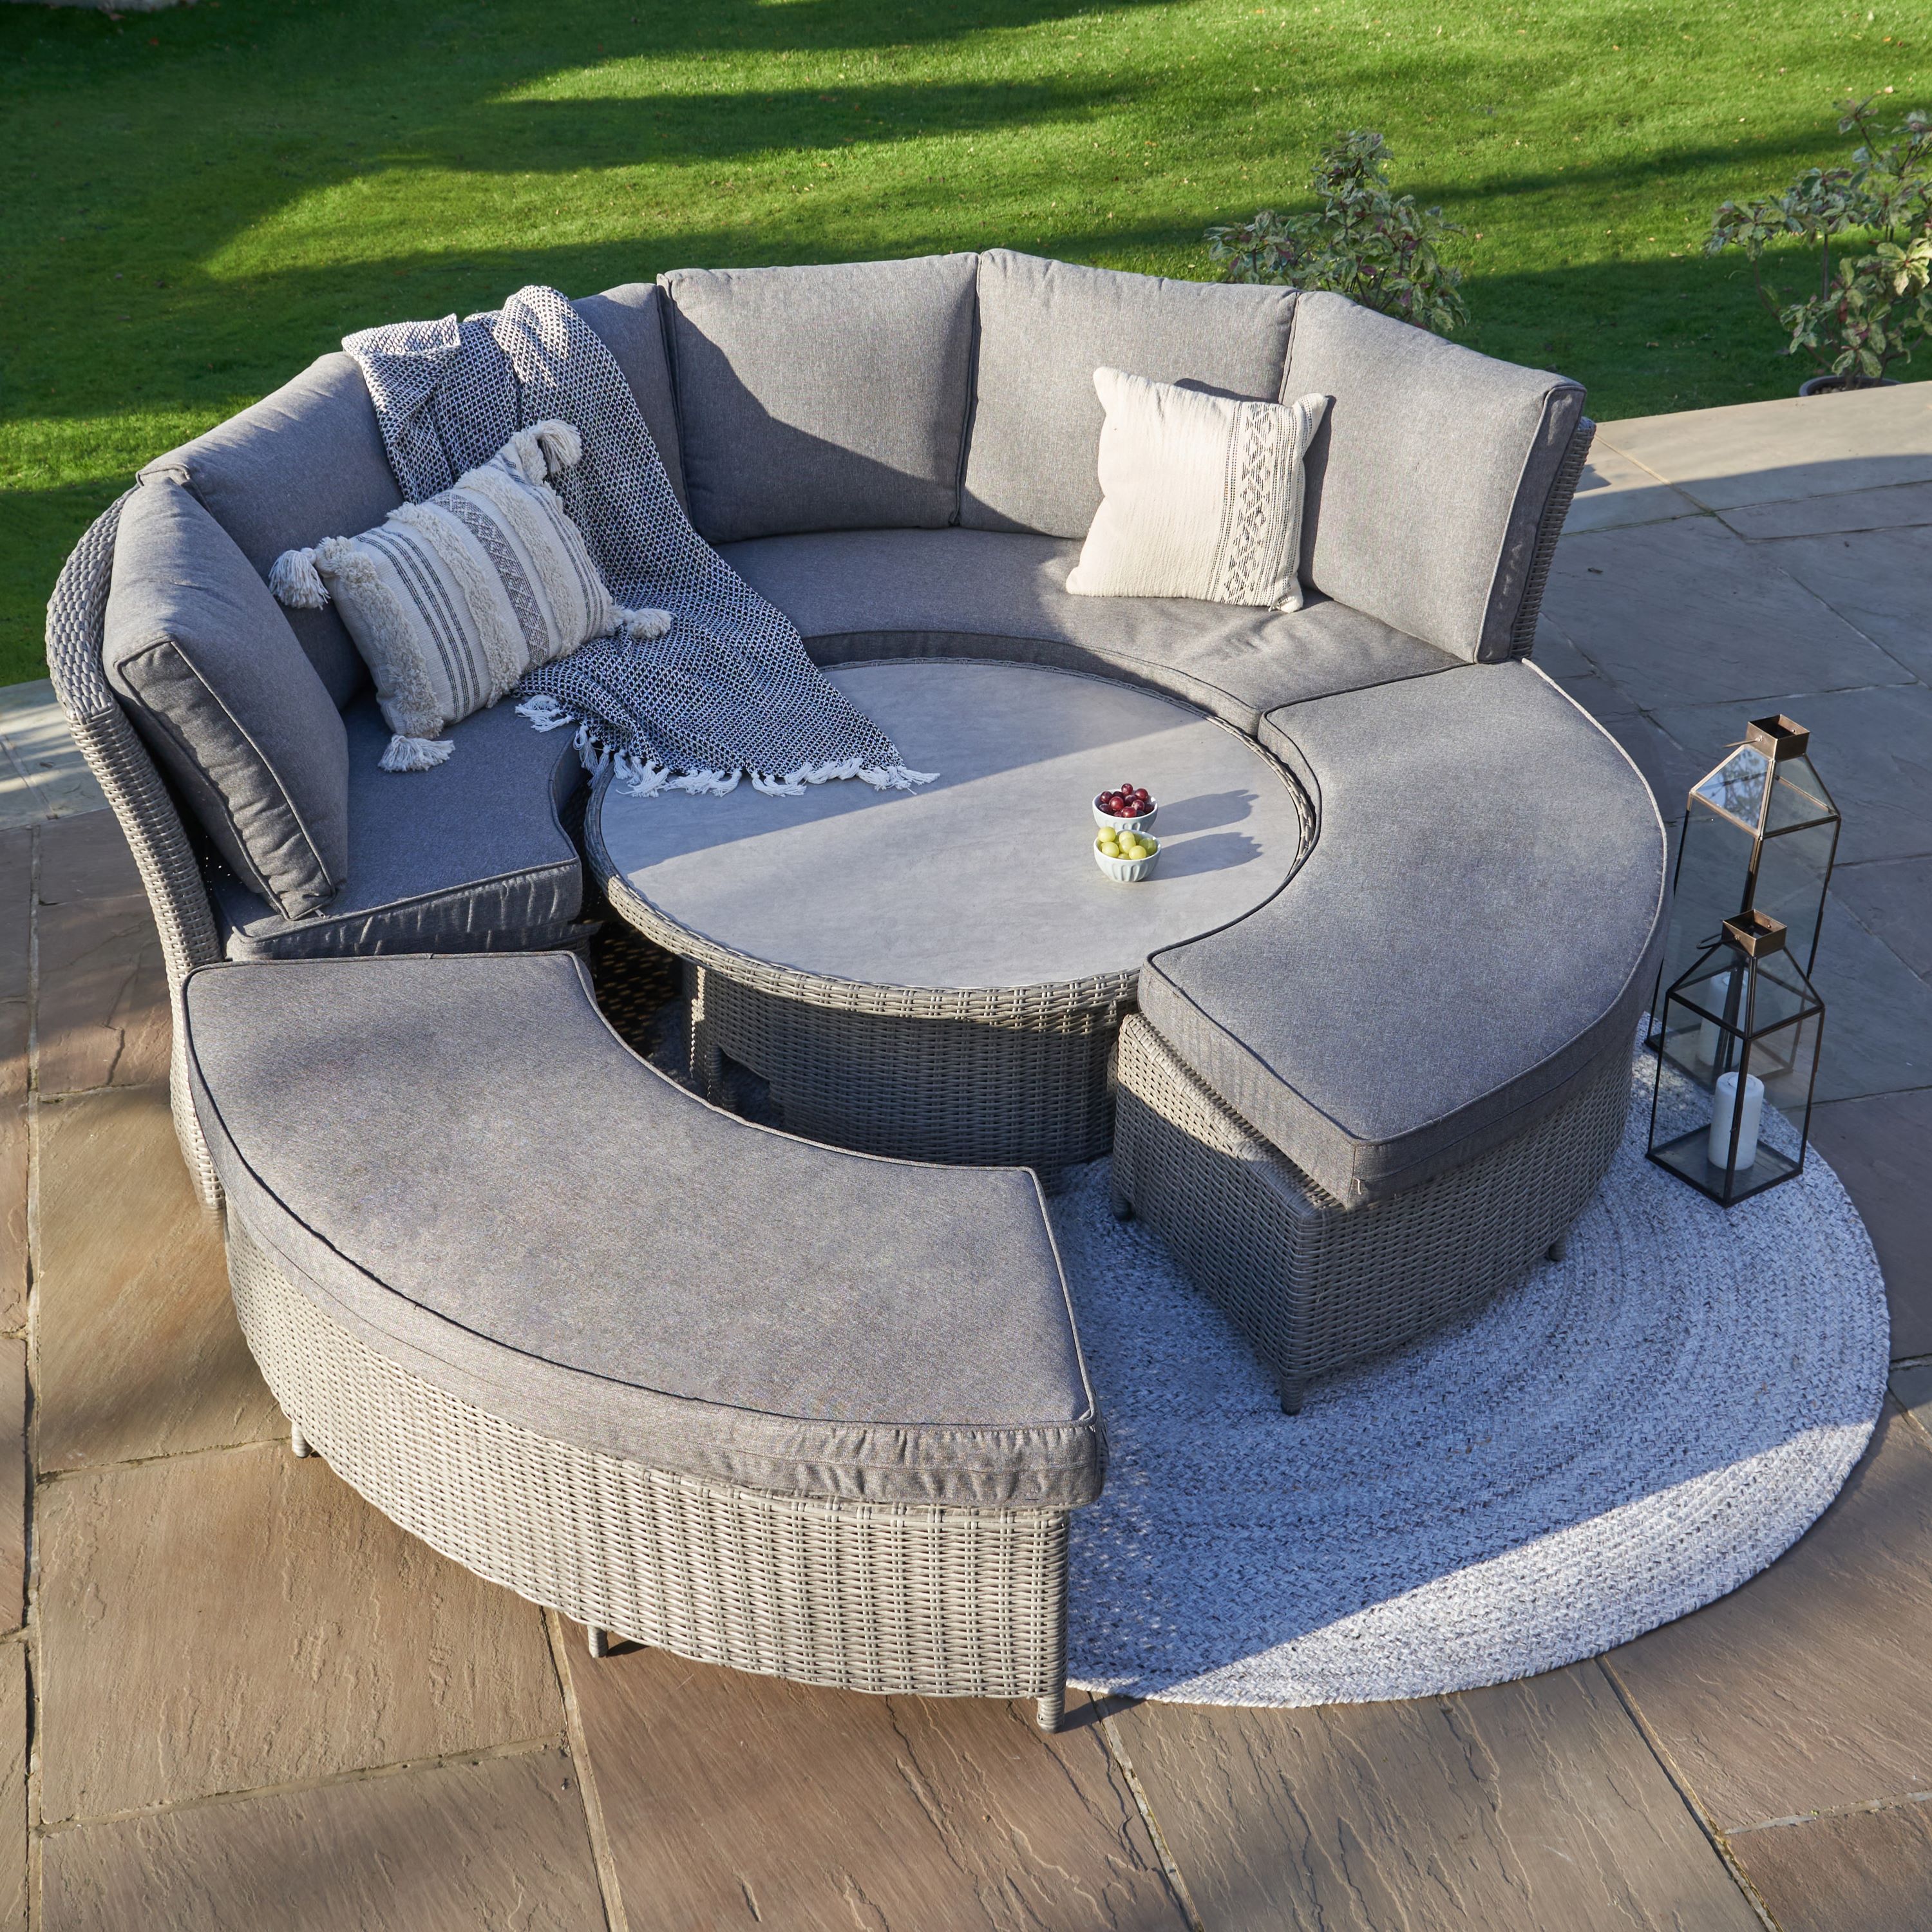 Bermuda Daybed Garden Dining Set With Ceramic Top Slate Grey